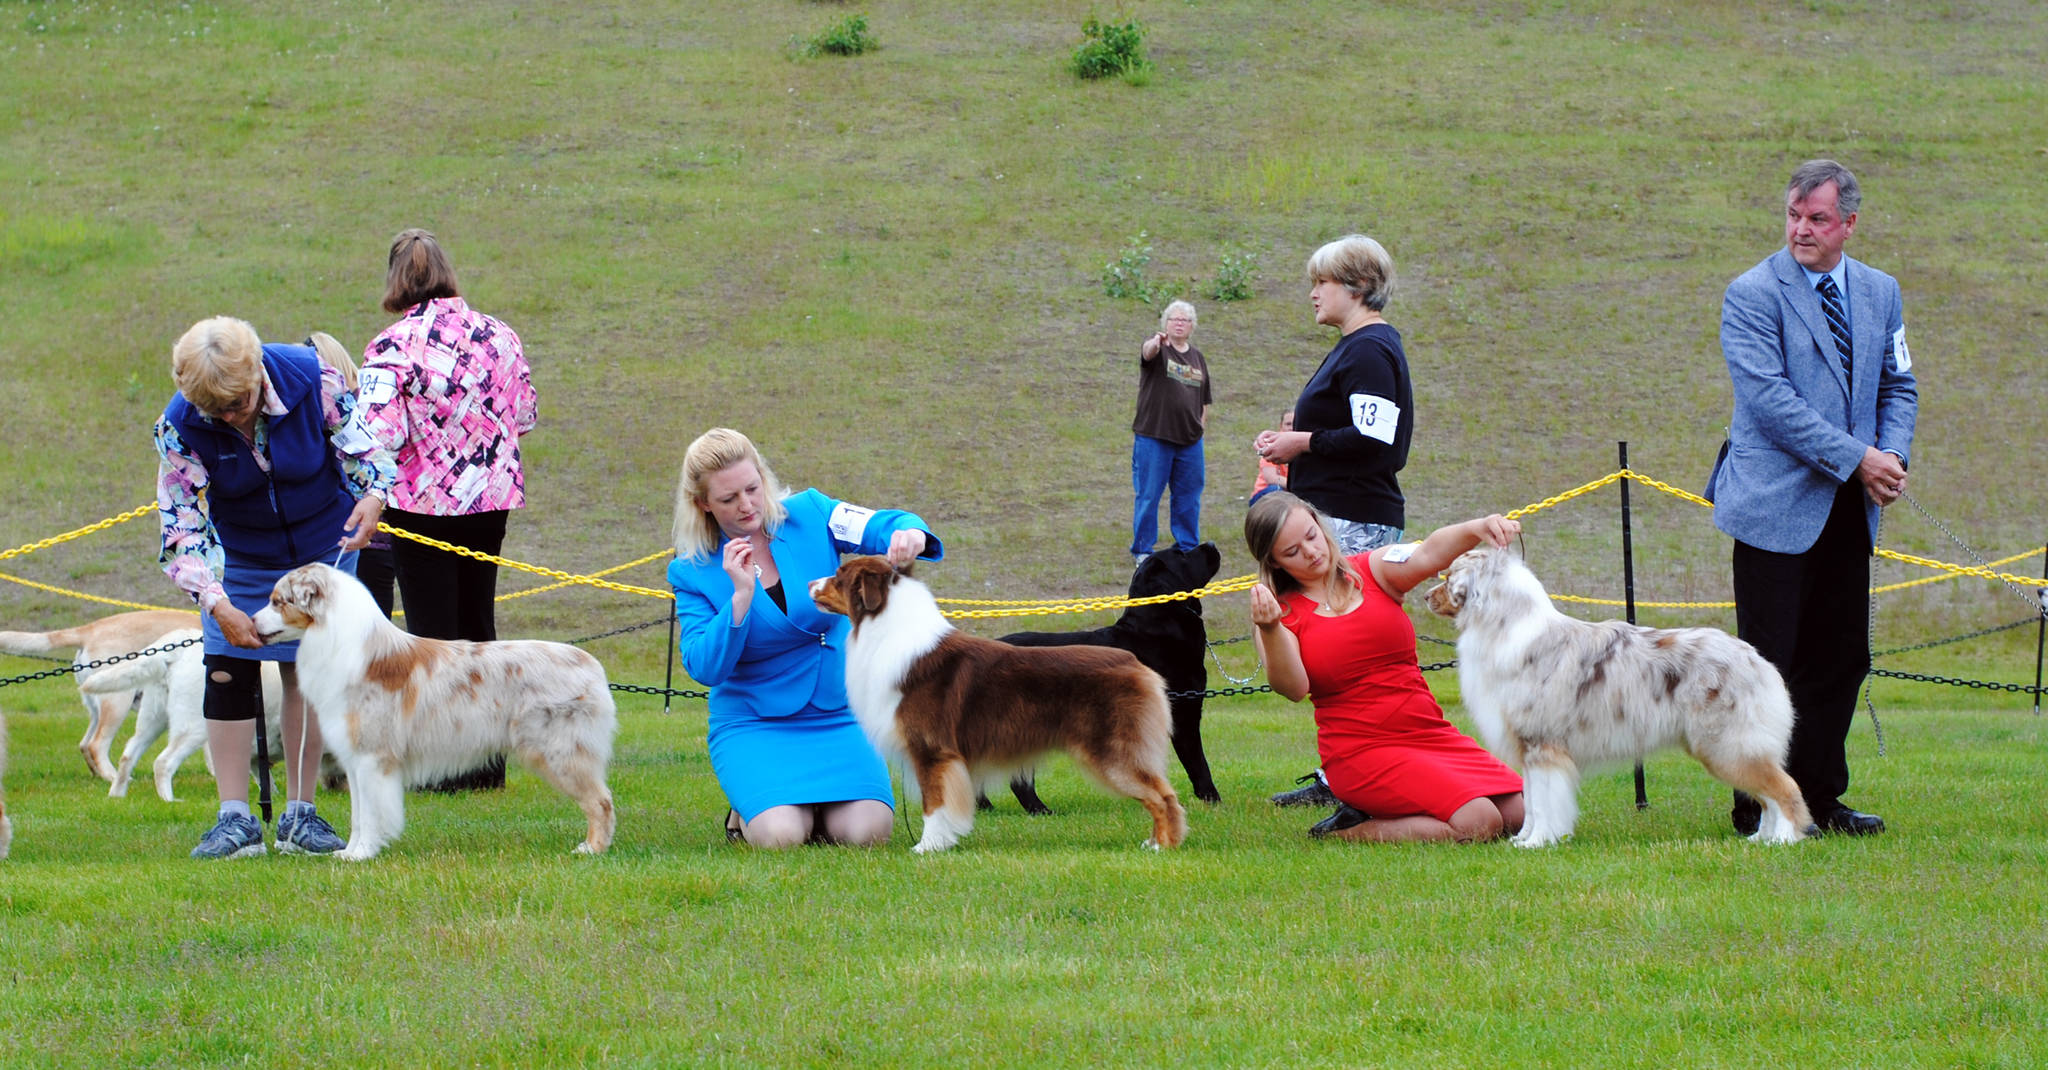 Handlers prepare for the Australian Shepherd breed competition during the Kenai Kennel Club dog show Saturday, July 15, 2017 at Skyview Middle School in Soldotna, Alaska. (Photo by Kat Sorensen/Peninsula Clarion)